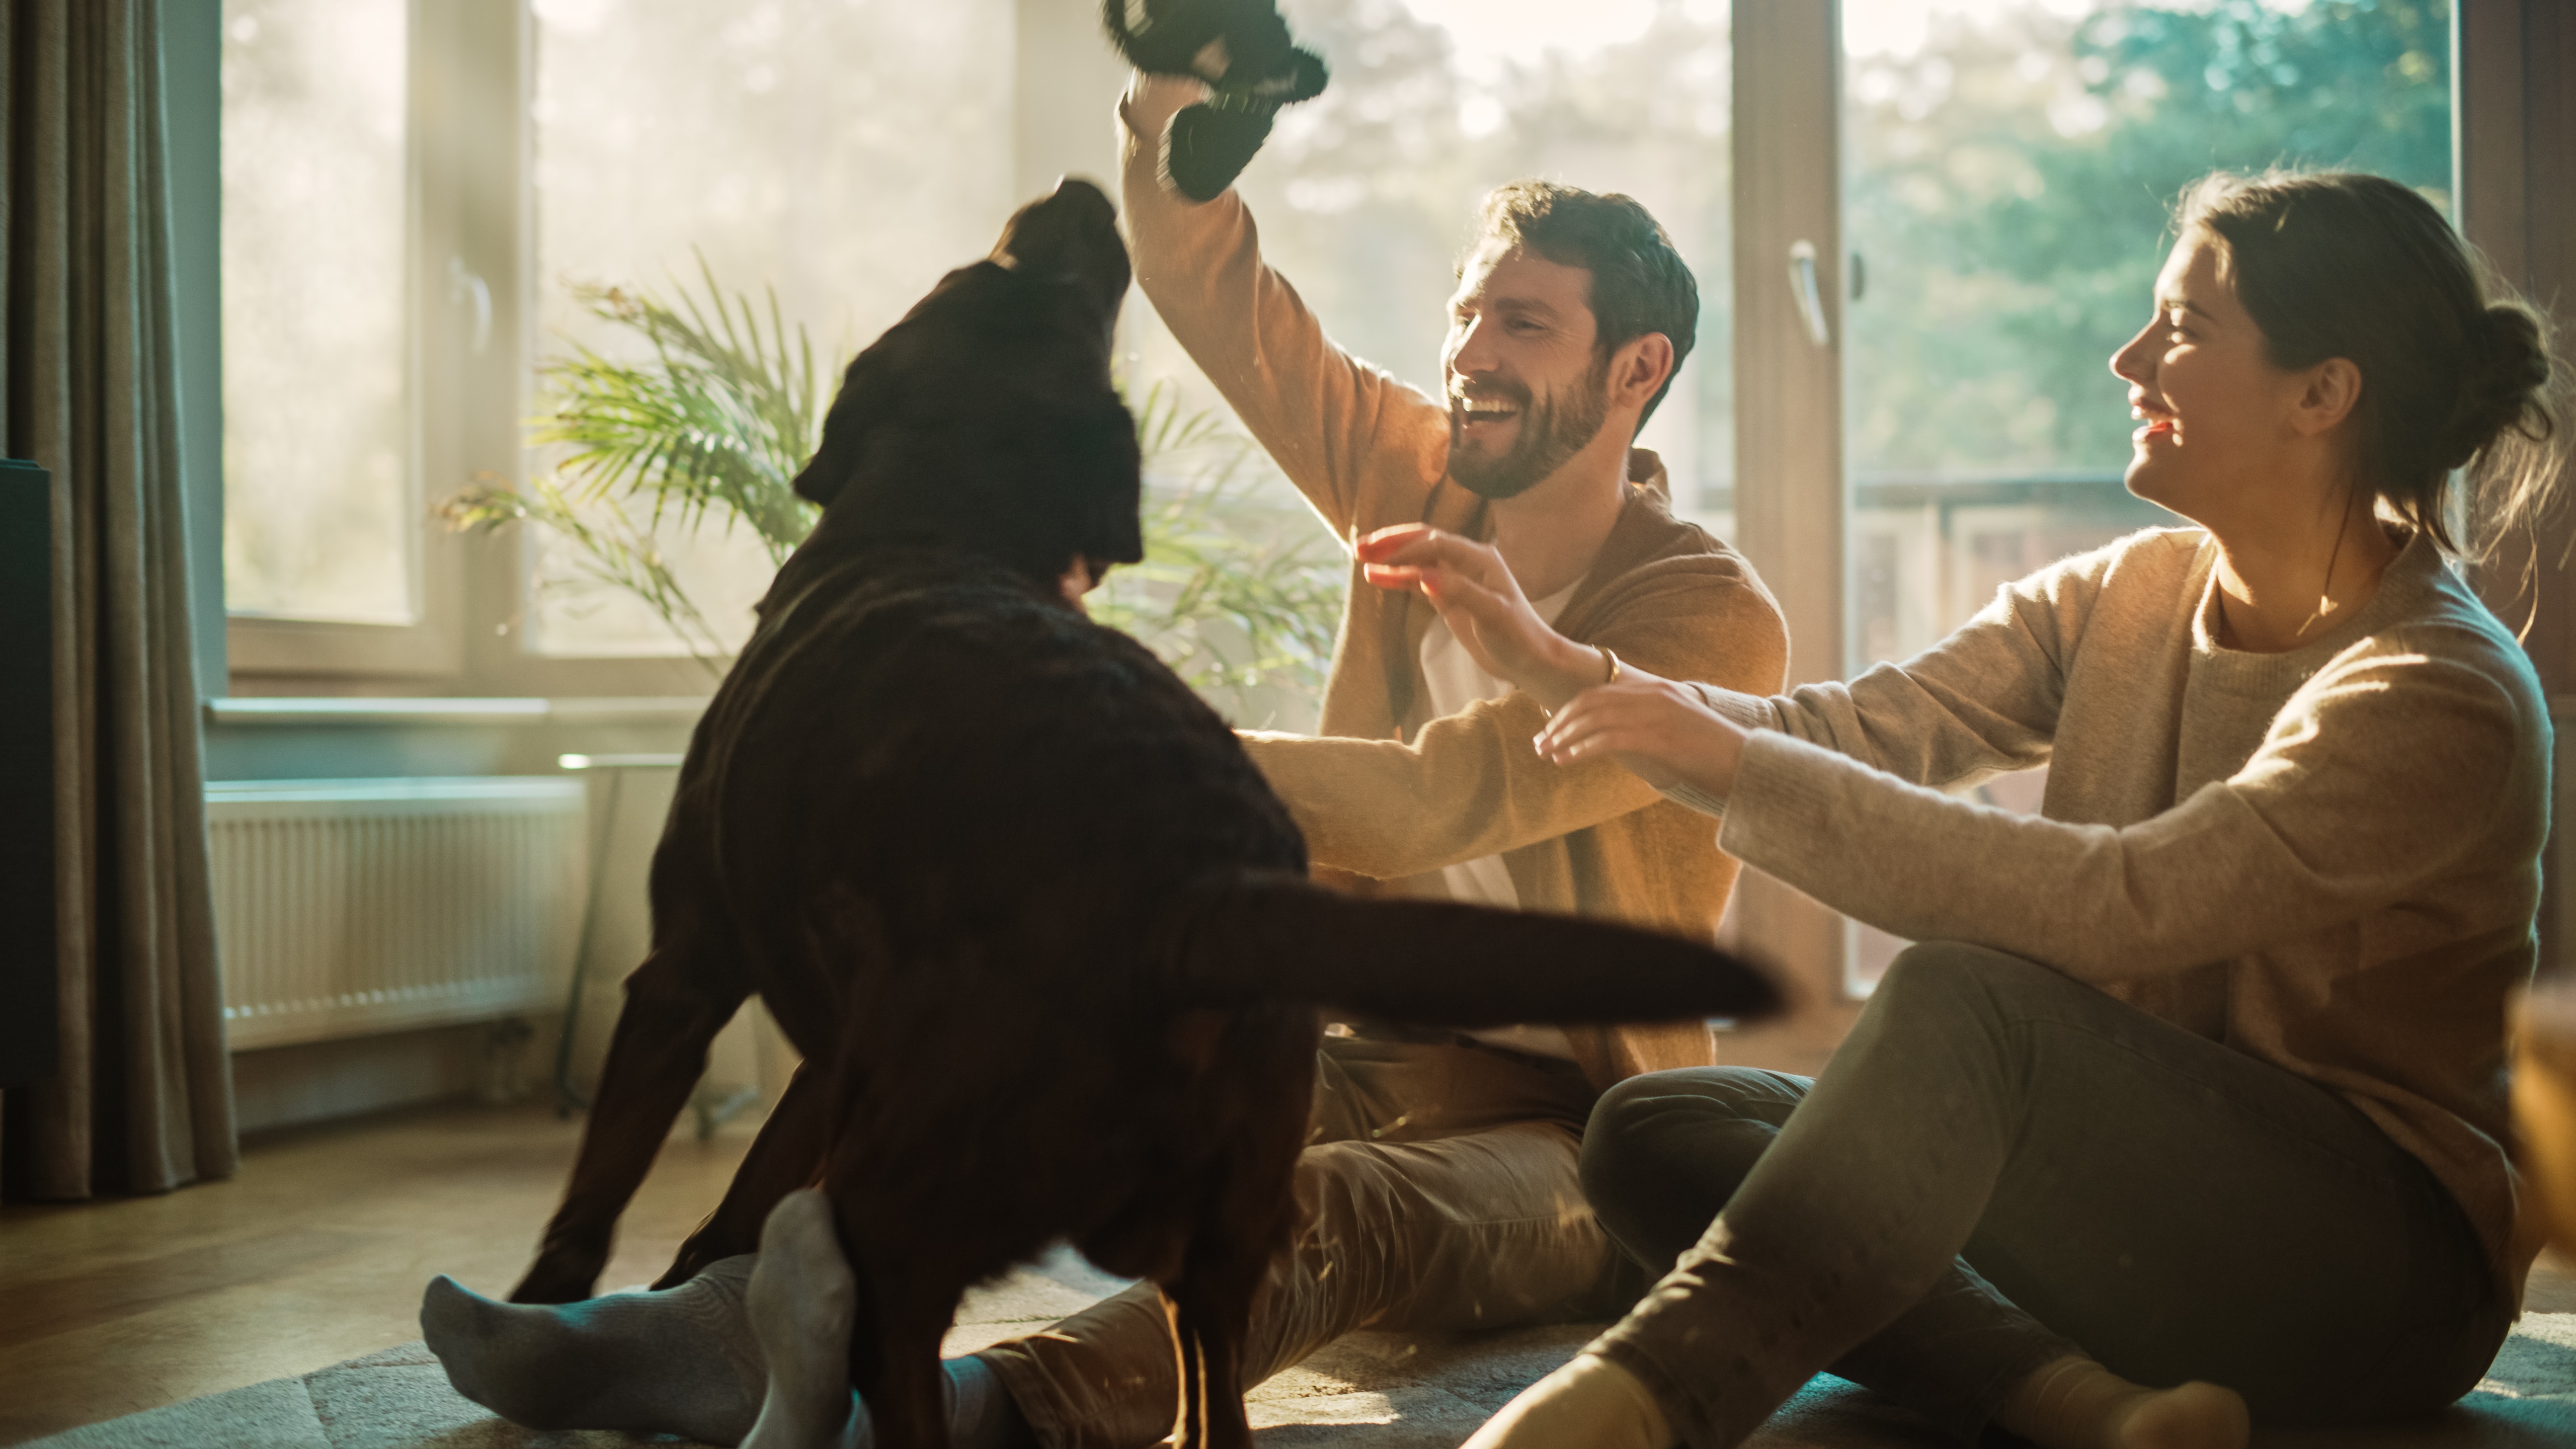 A happy couple playing with their dog | Source: Shutterstock